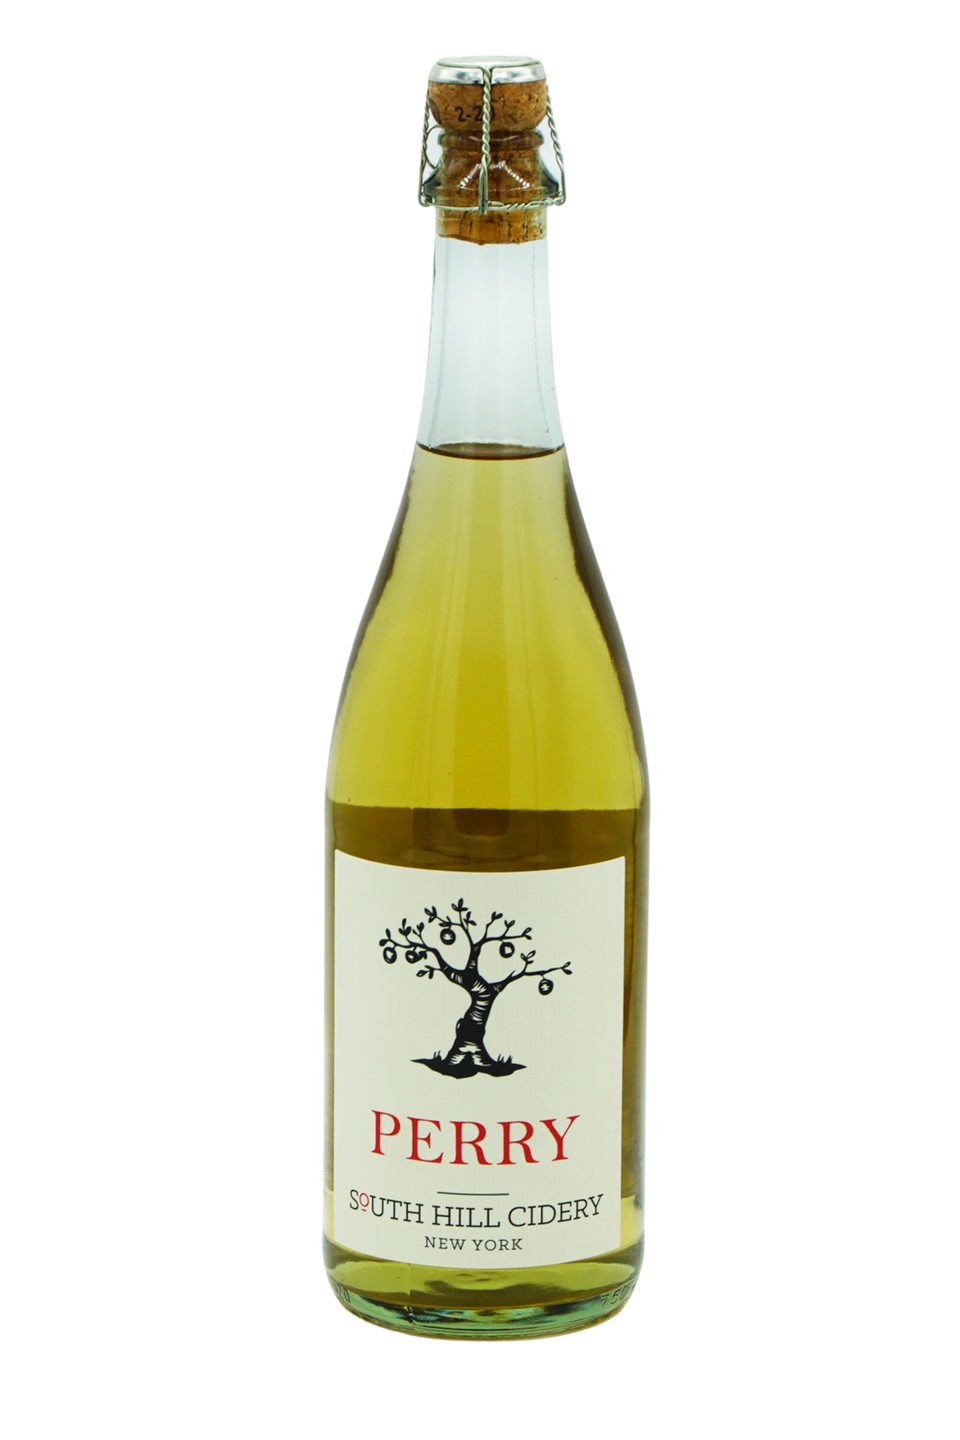 Perry, South Hill Cider NV